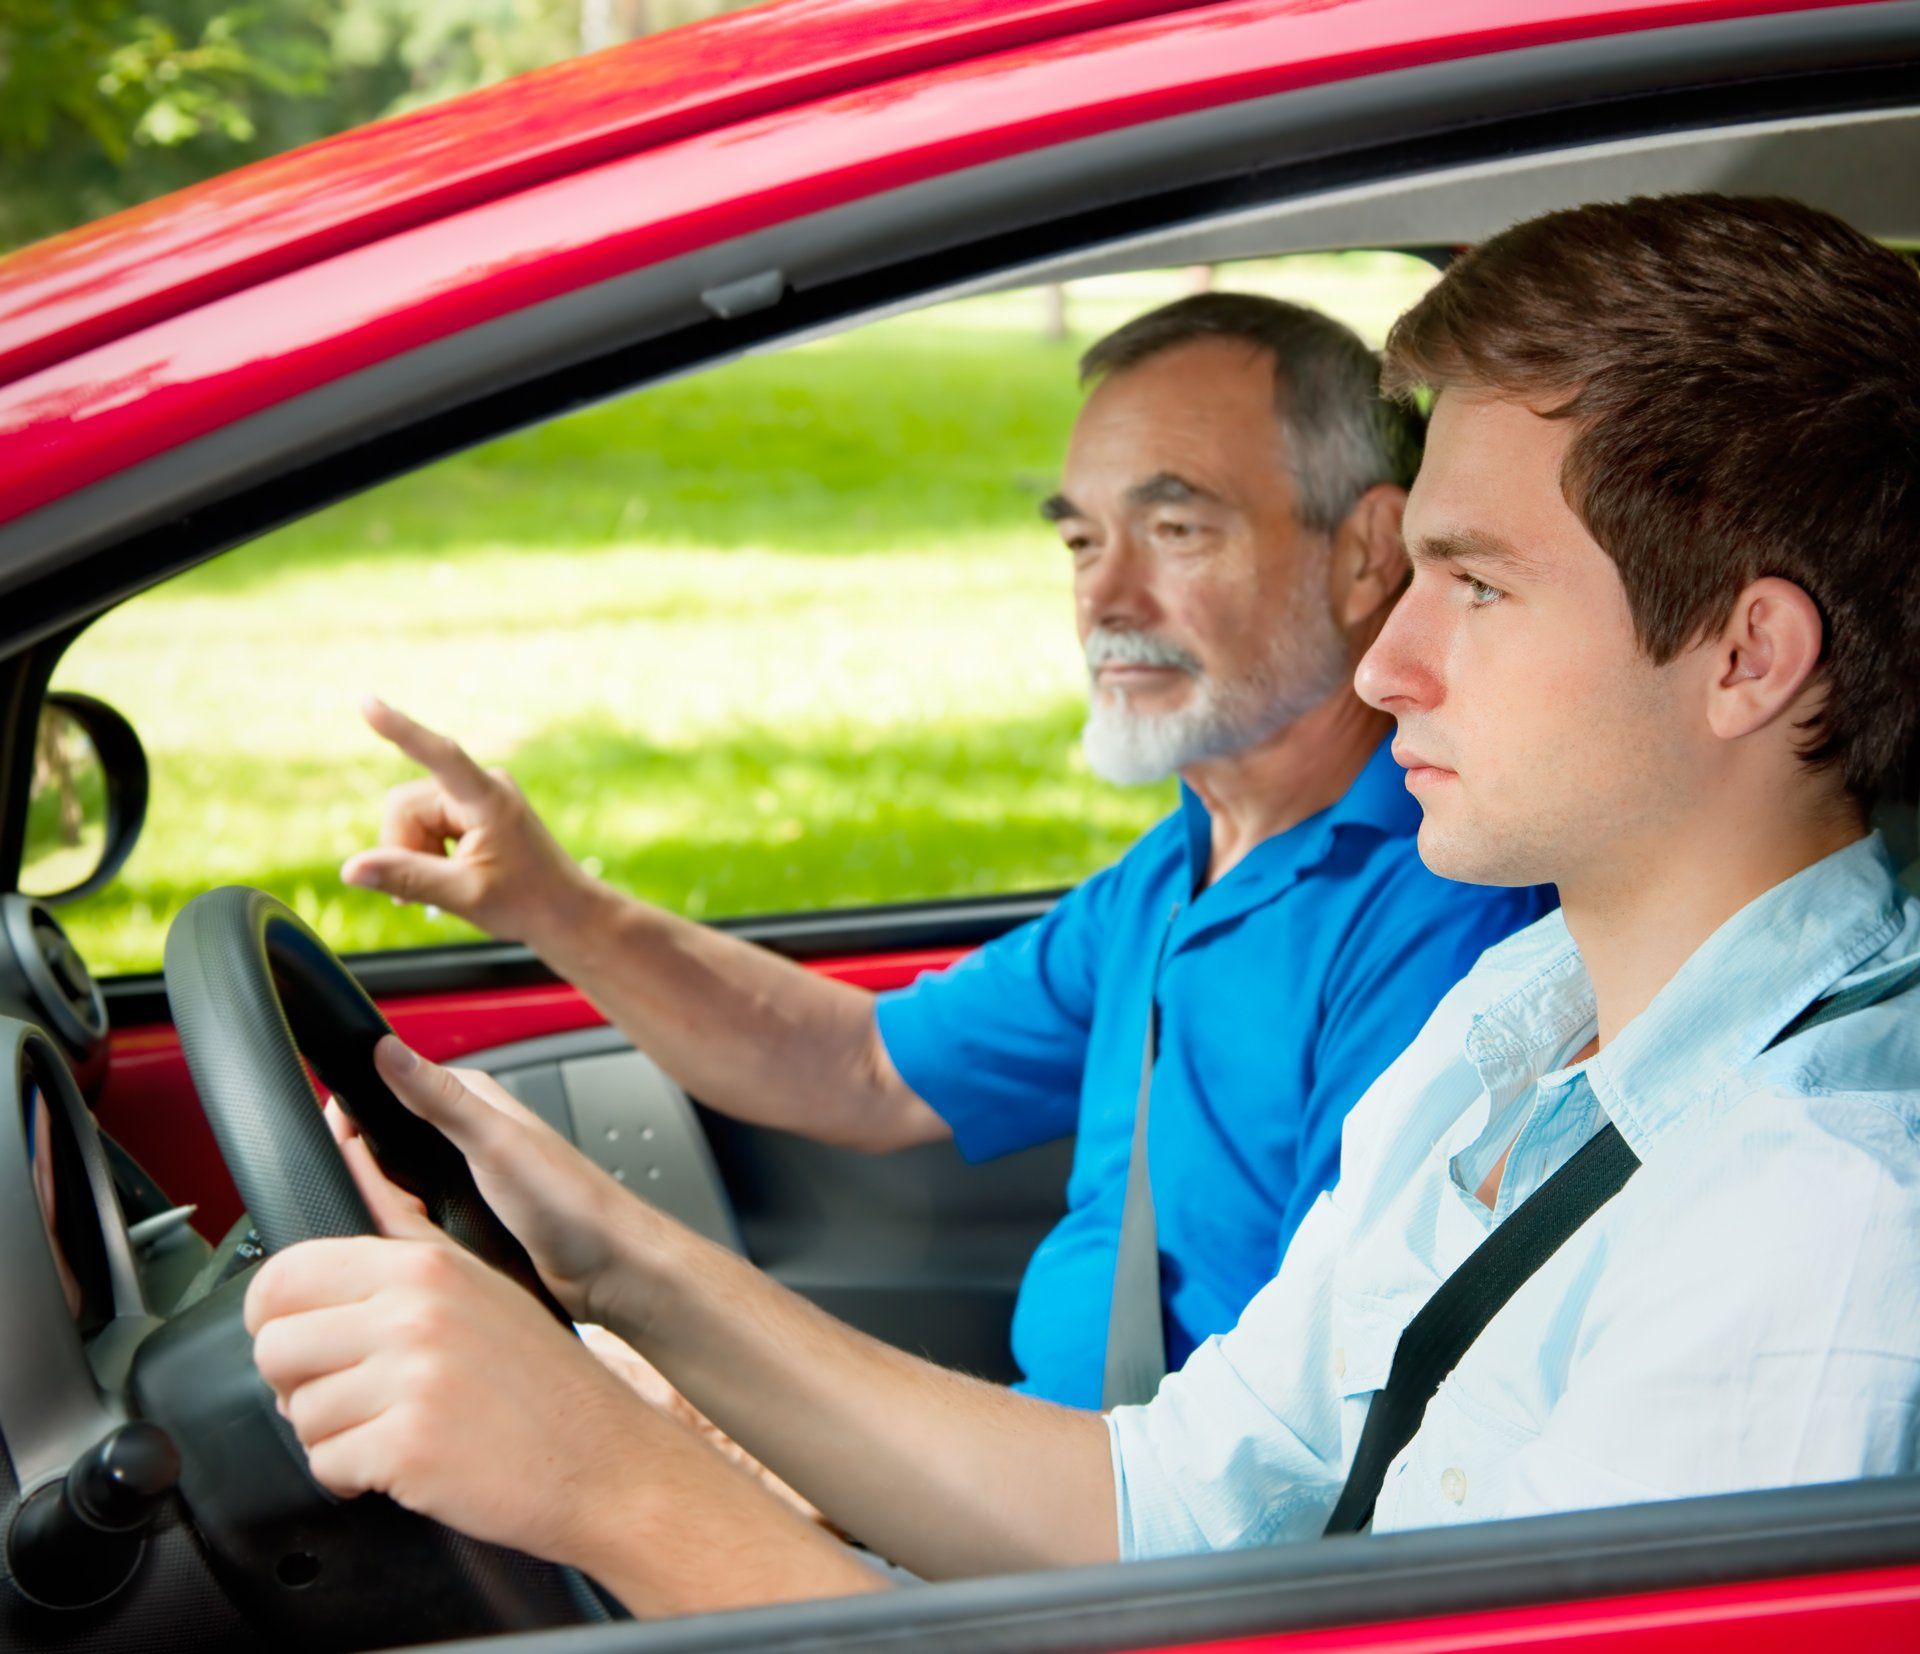 Professional Driving Instructor Teaching Defensive Driving